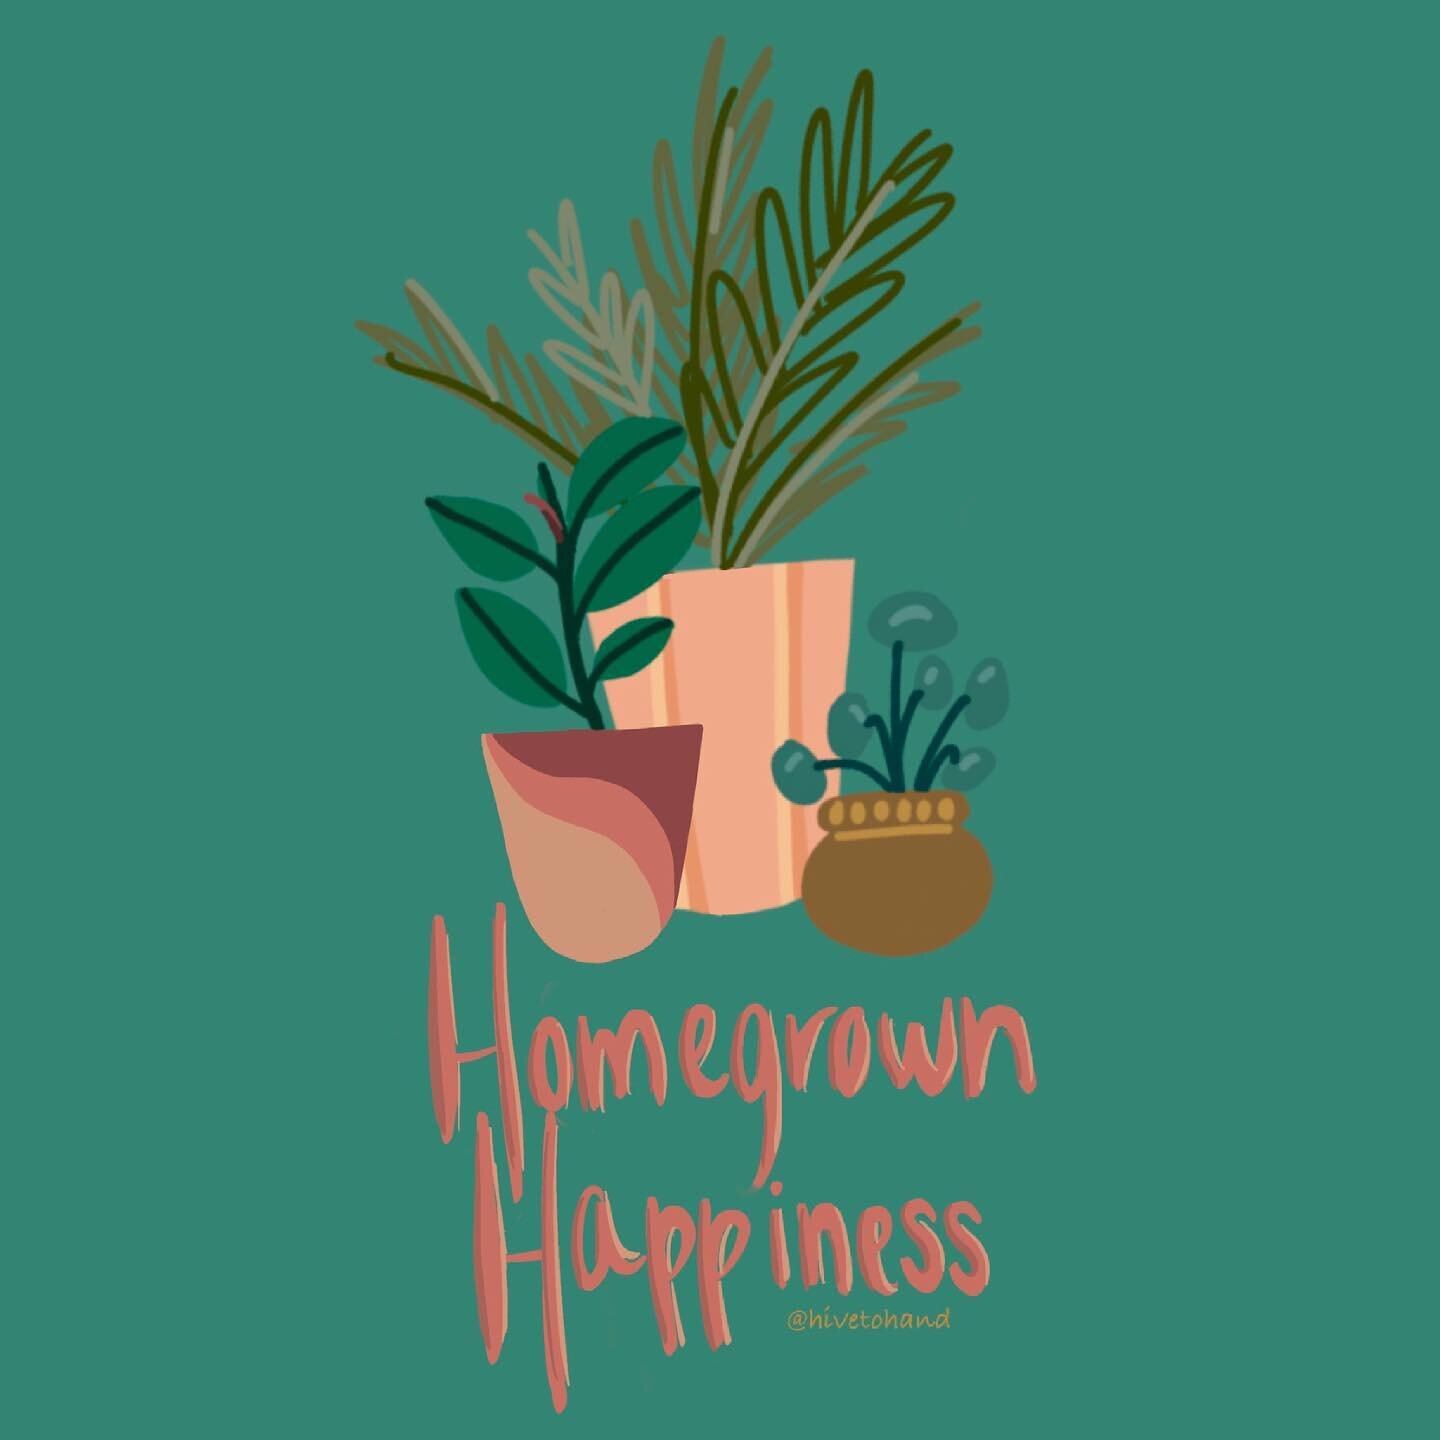 Homegrown Happiness:
Somewhat of our motto around here at H2H. Choosing everyday to embrace the little happy moments, finding the silver lining amongst a tough situation, and simply growing your inner happiness.